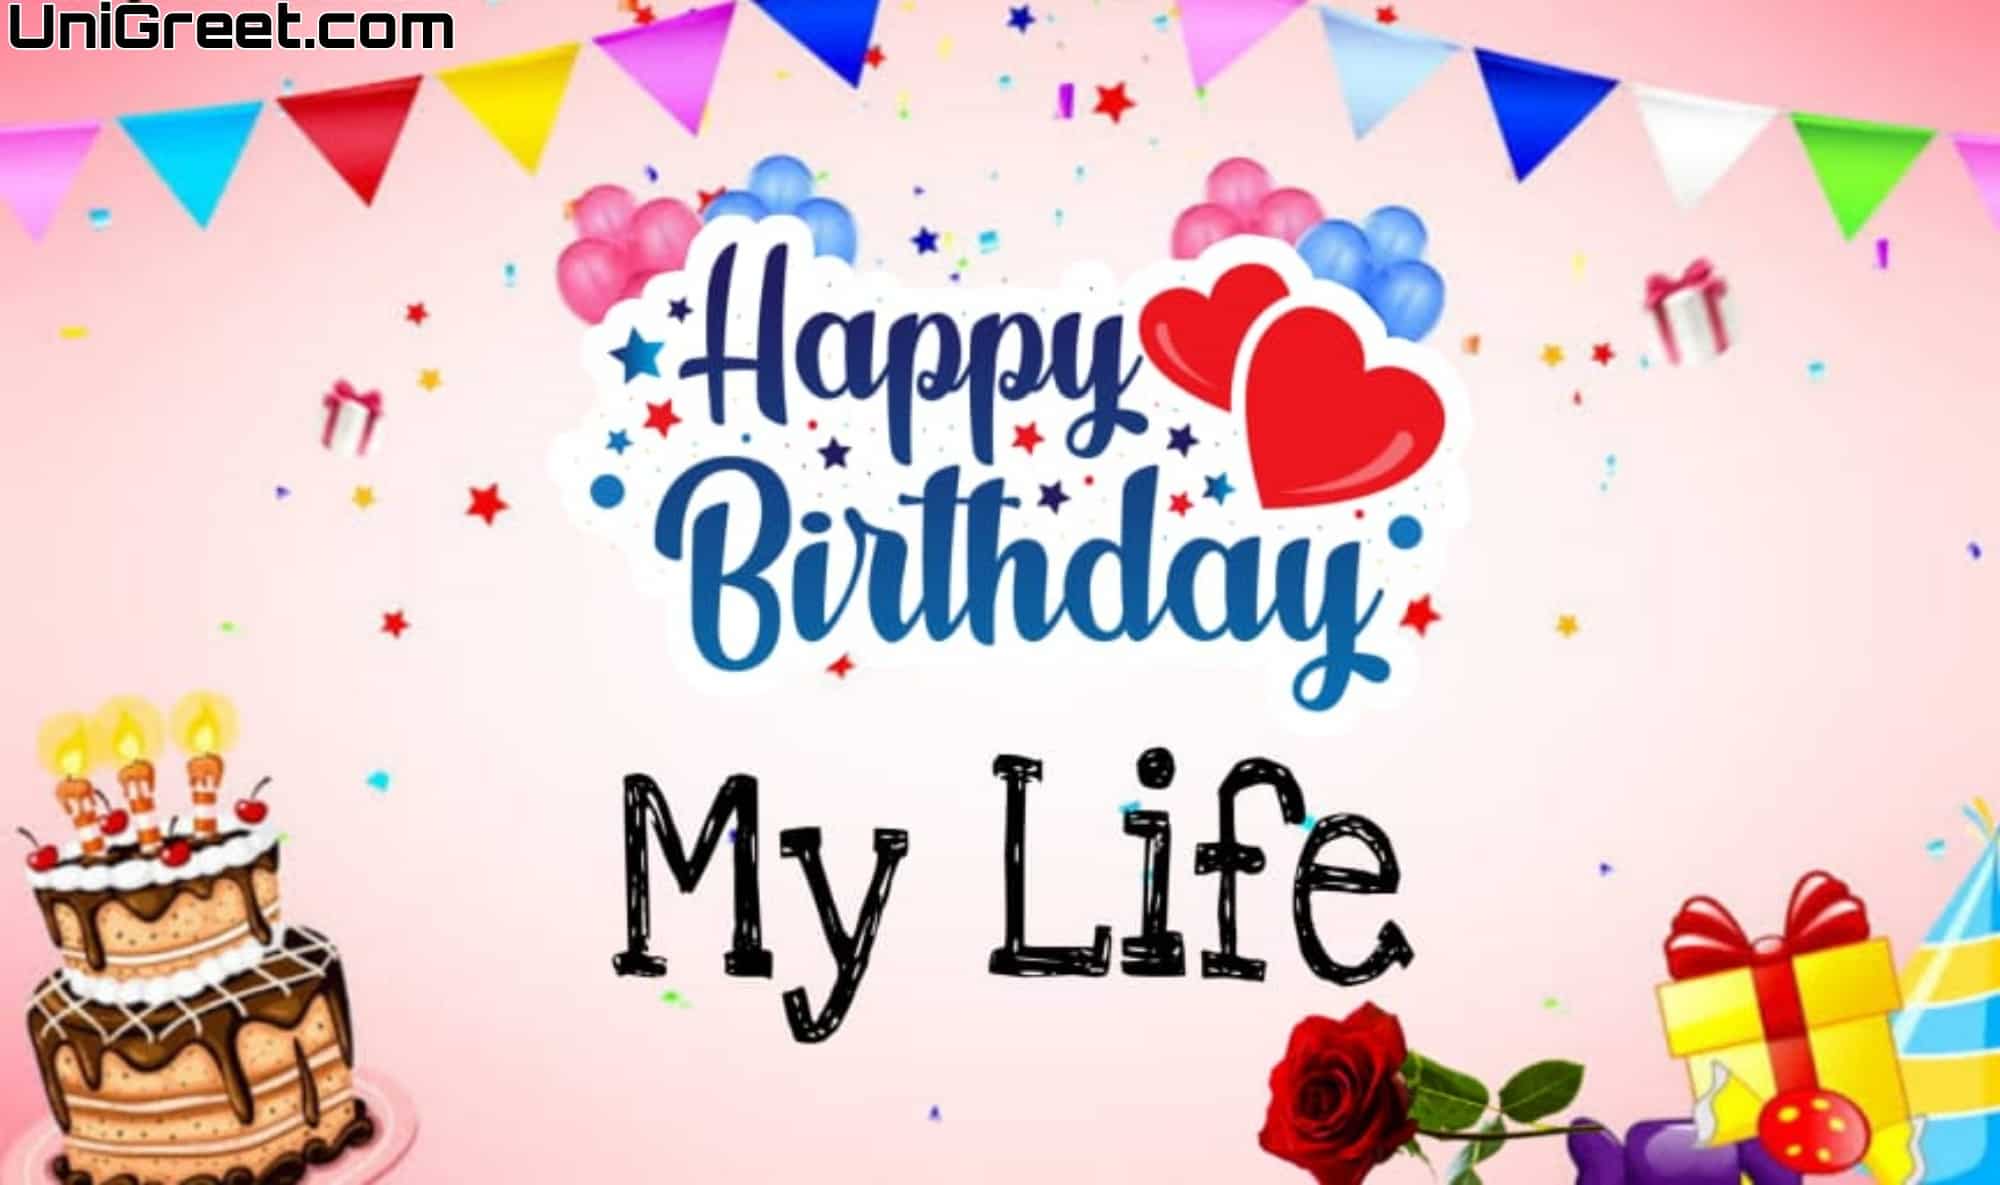 55 Romantic Happy Birthday Wishes Images For Her / Wife / Girlfriend